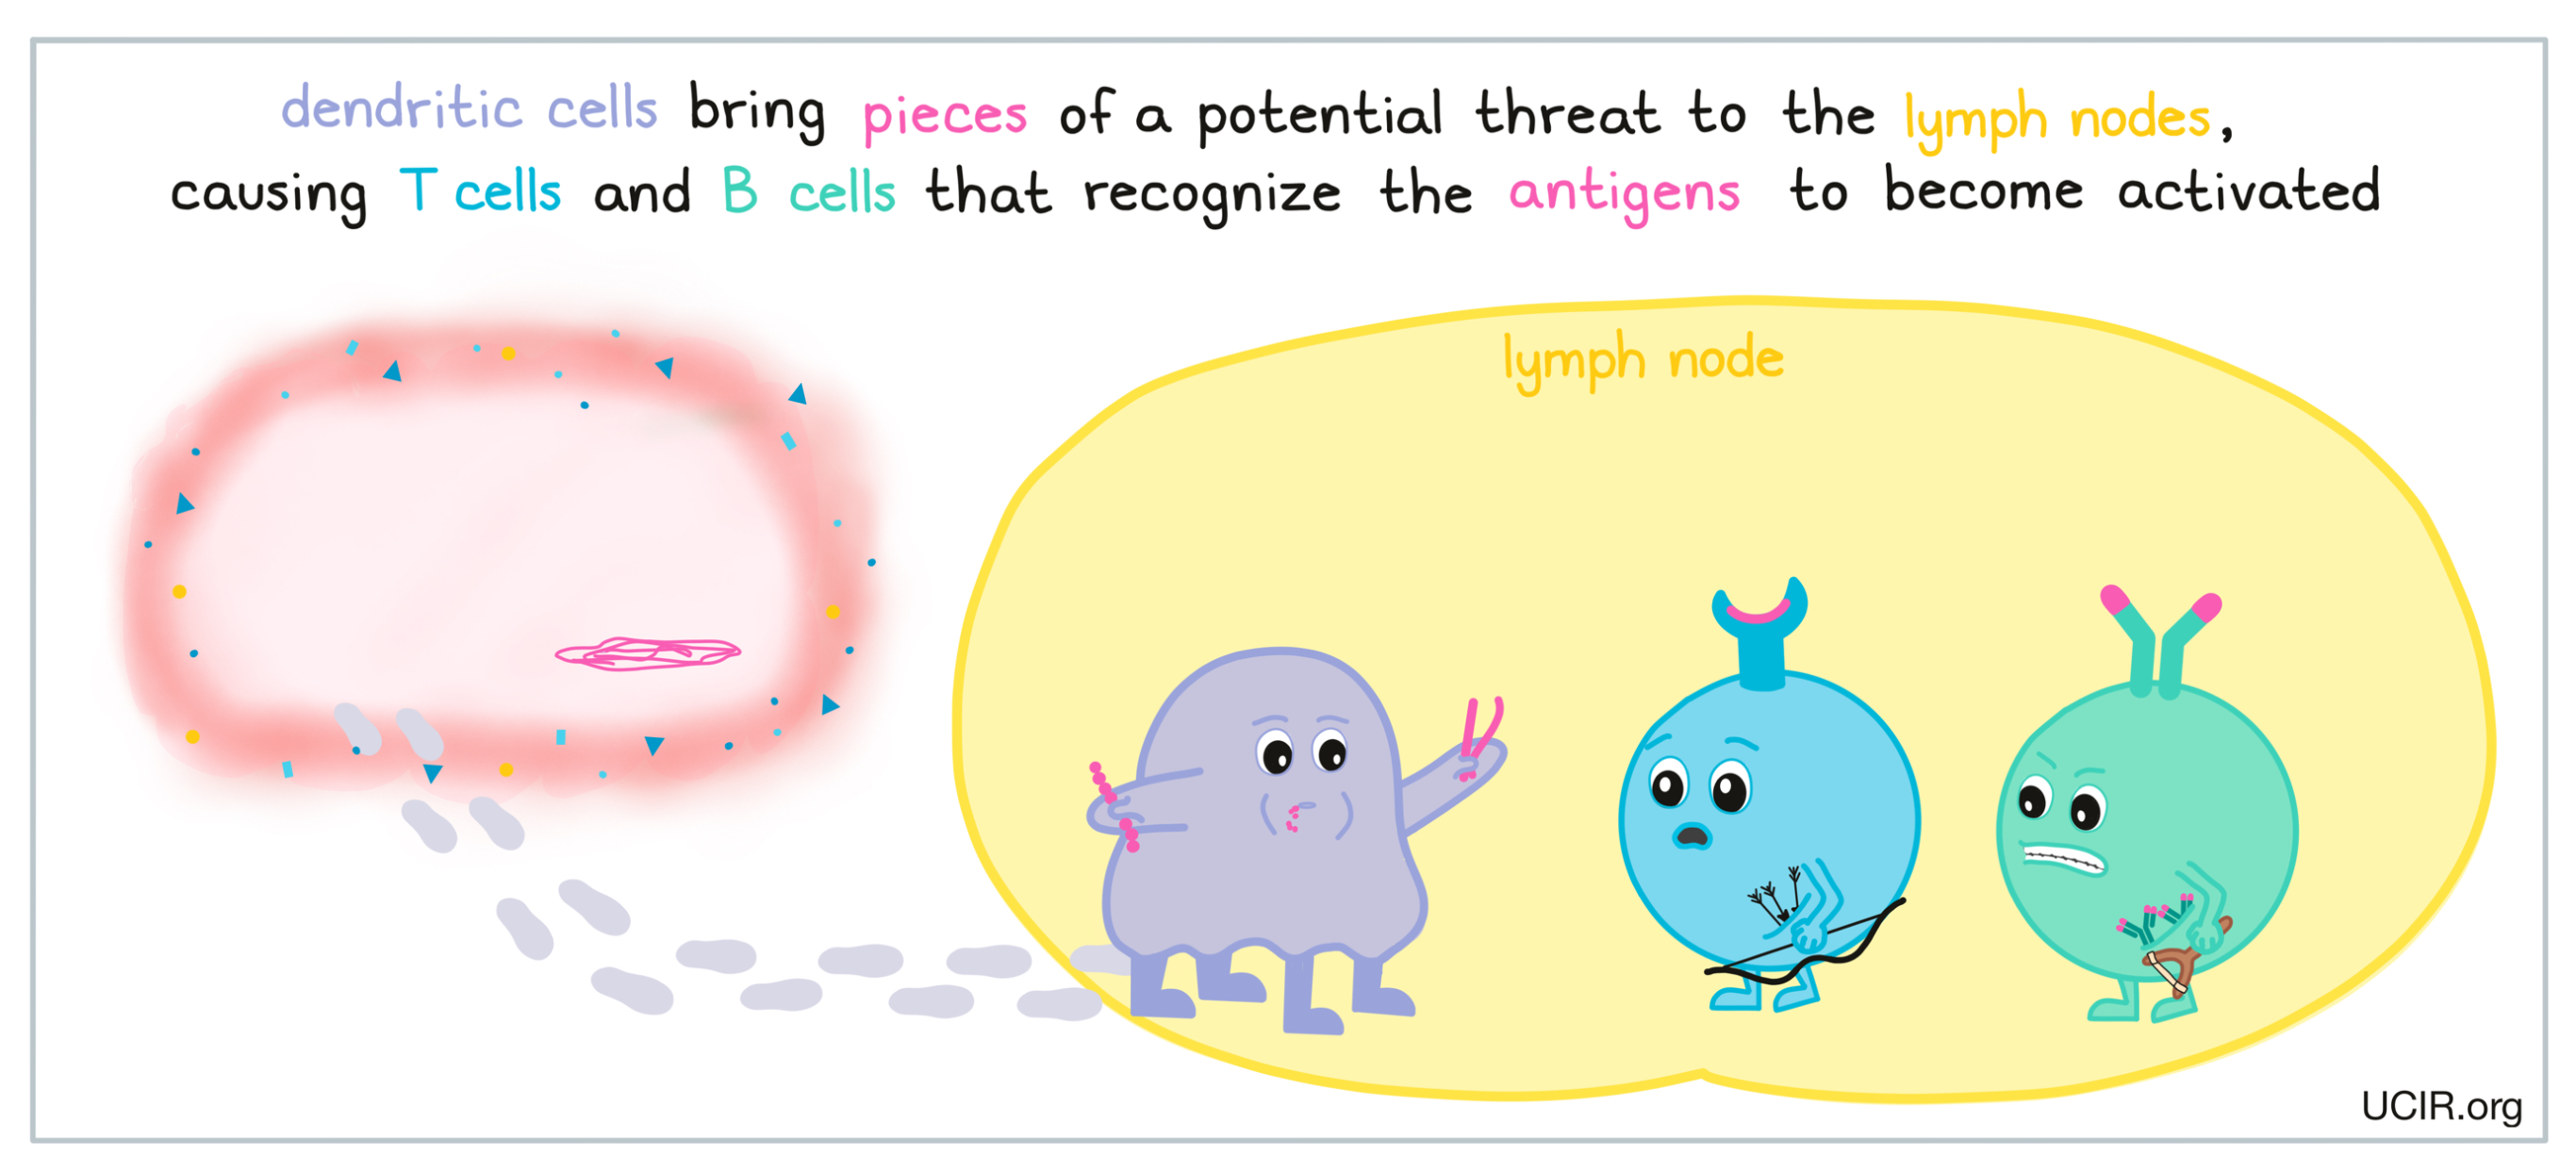 Getting to know the immune system